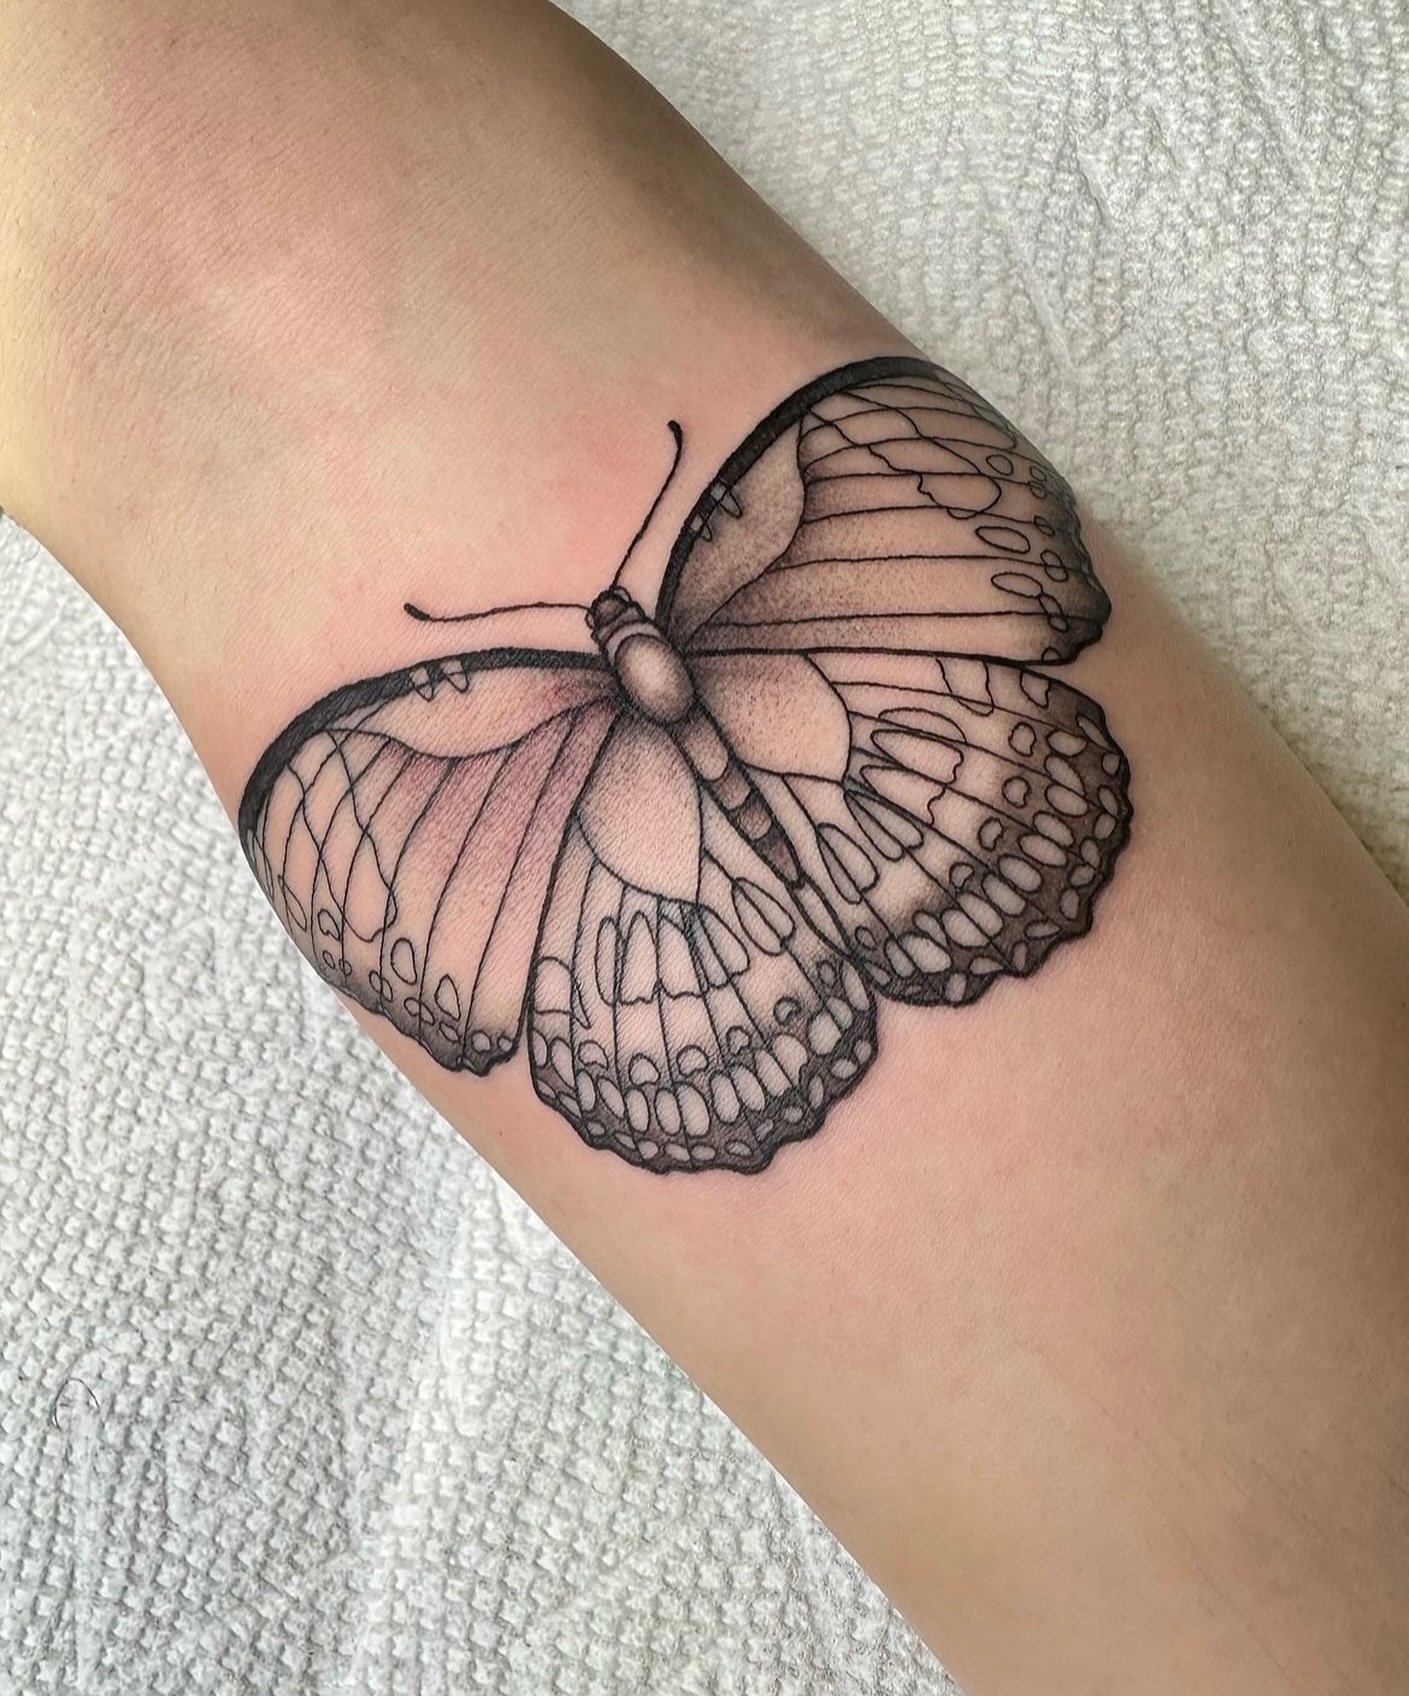 Blue moon butterfly by tattoo artist Sierra @witchinghourink Sierra does walk in tattoos at the shop every Wednesday 12-6 and there will be some butterfly flash at our Spring Tattoo Flash Event &amp; Fundraiser this Saturday April 20th, come join the